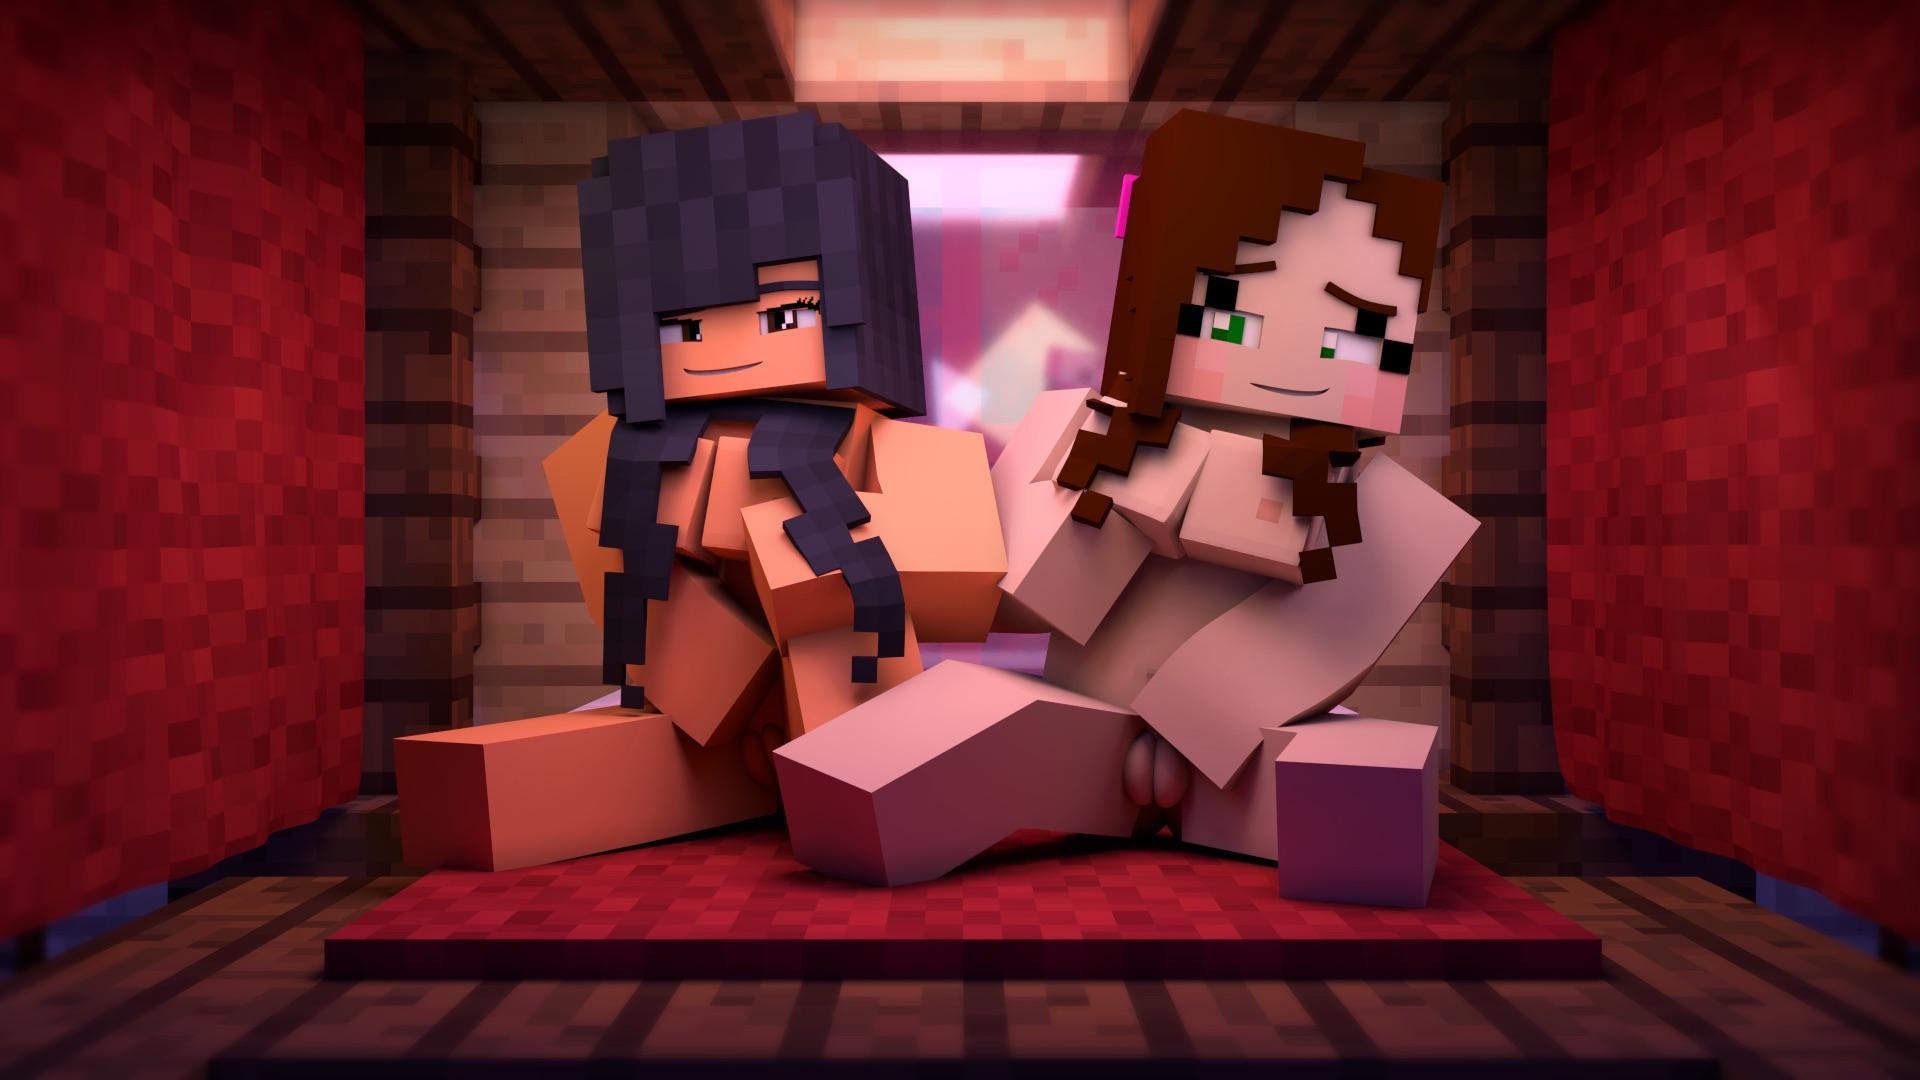 1920x1080 Aphmau and Gamingwithjen getting it on : minecraftporn.